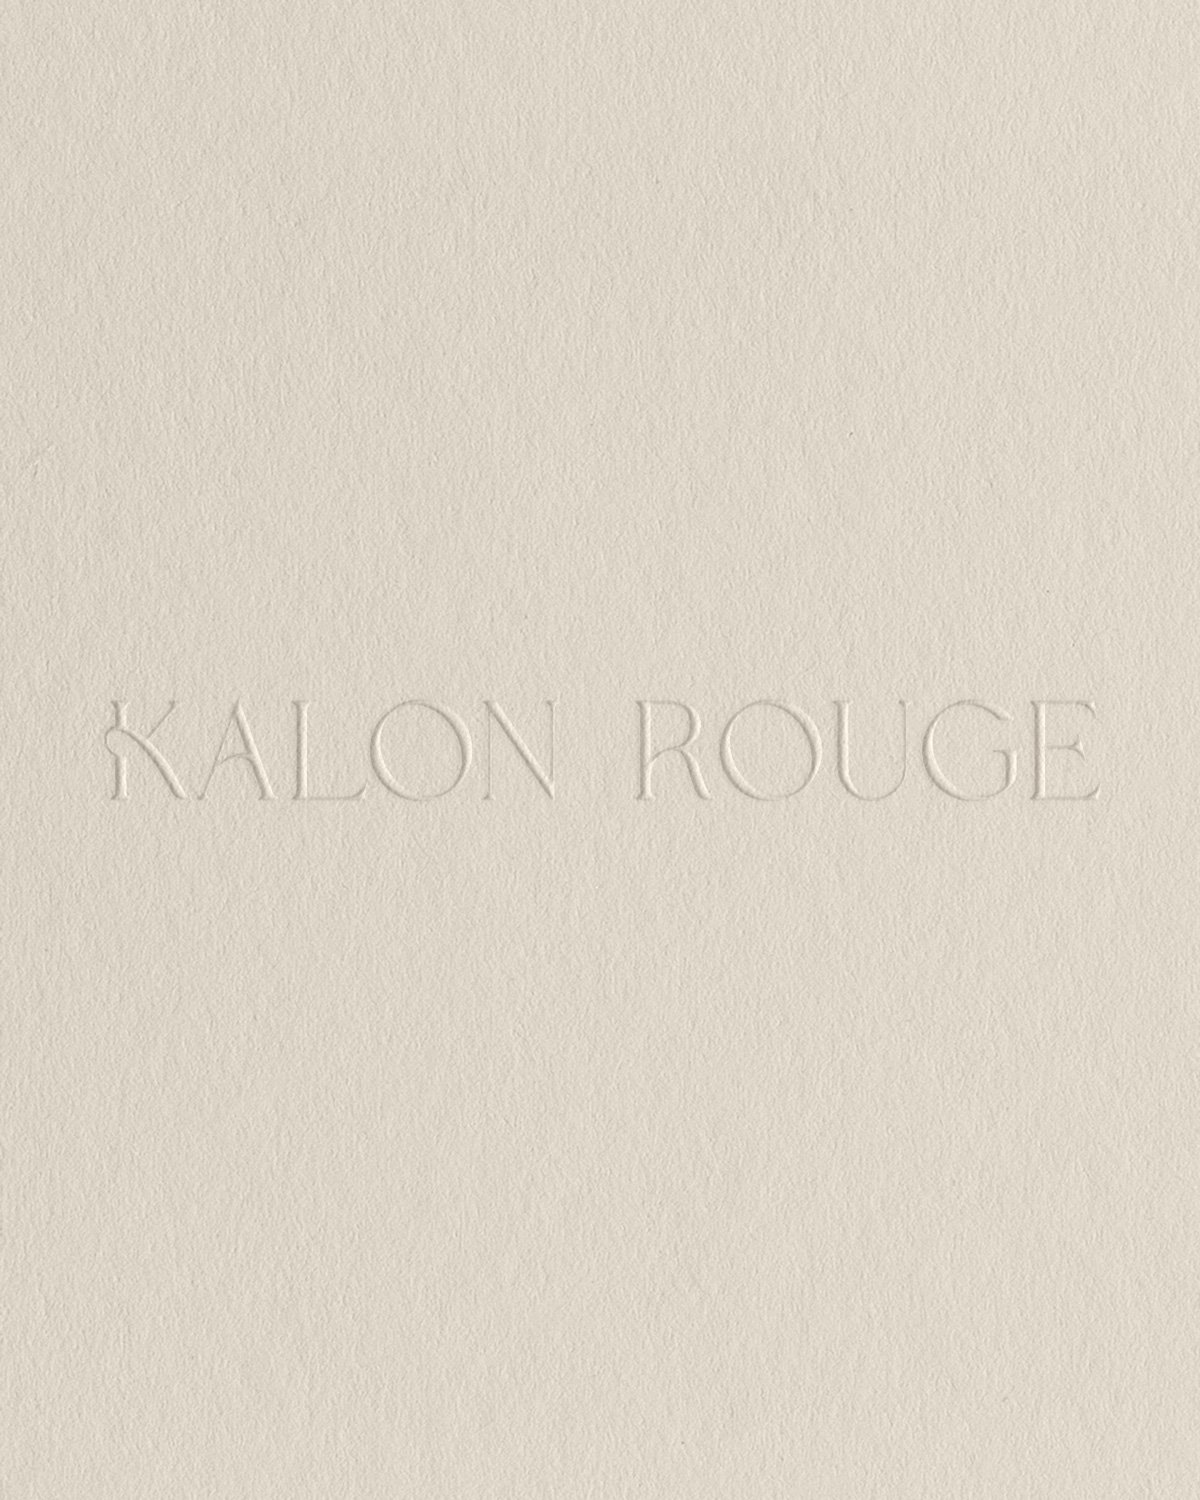 Kalon Rouge logo design blind embossed on stone colored textured paper